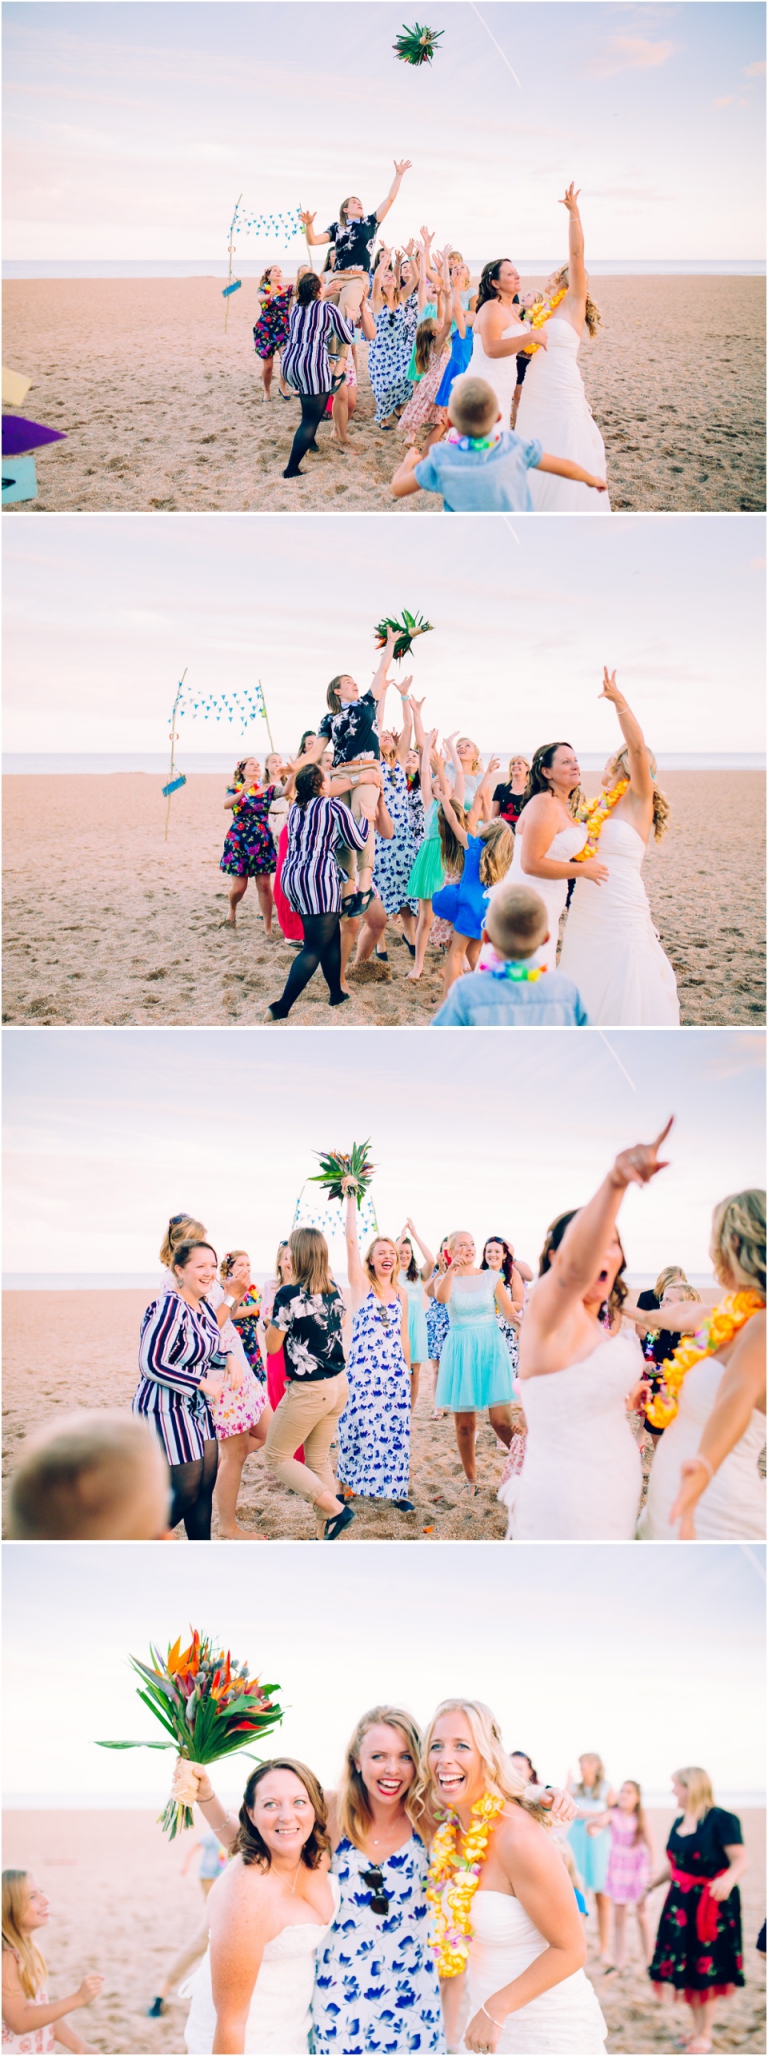 75 Blackpool Sands Dartmouth Wedding Photography Creative Documentary - brides throwing bouquet epic catch